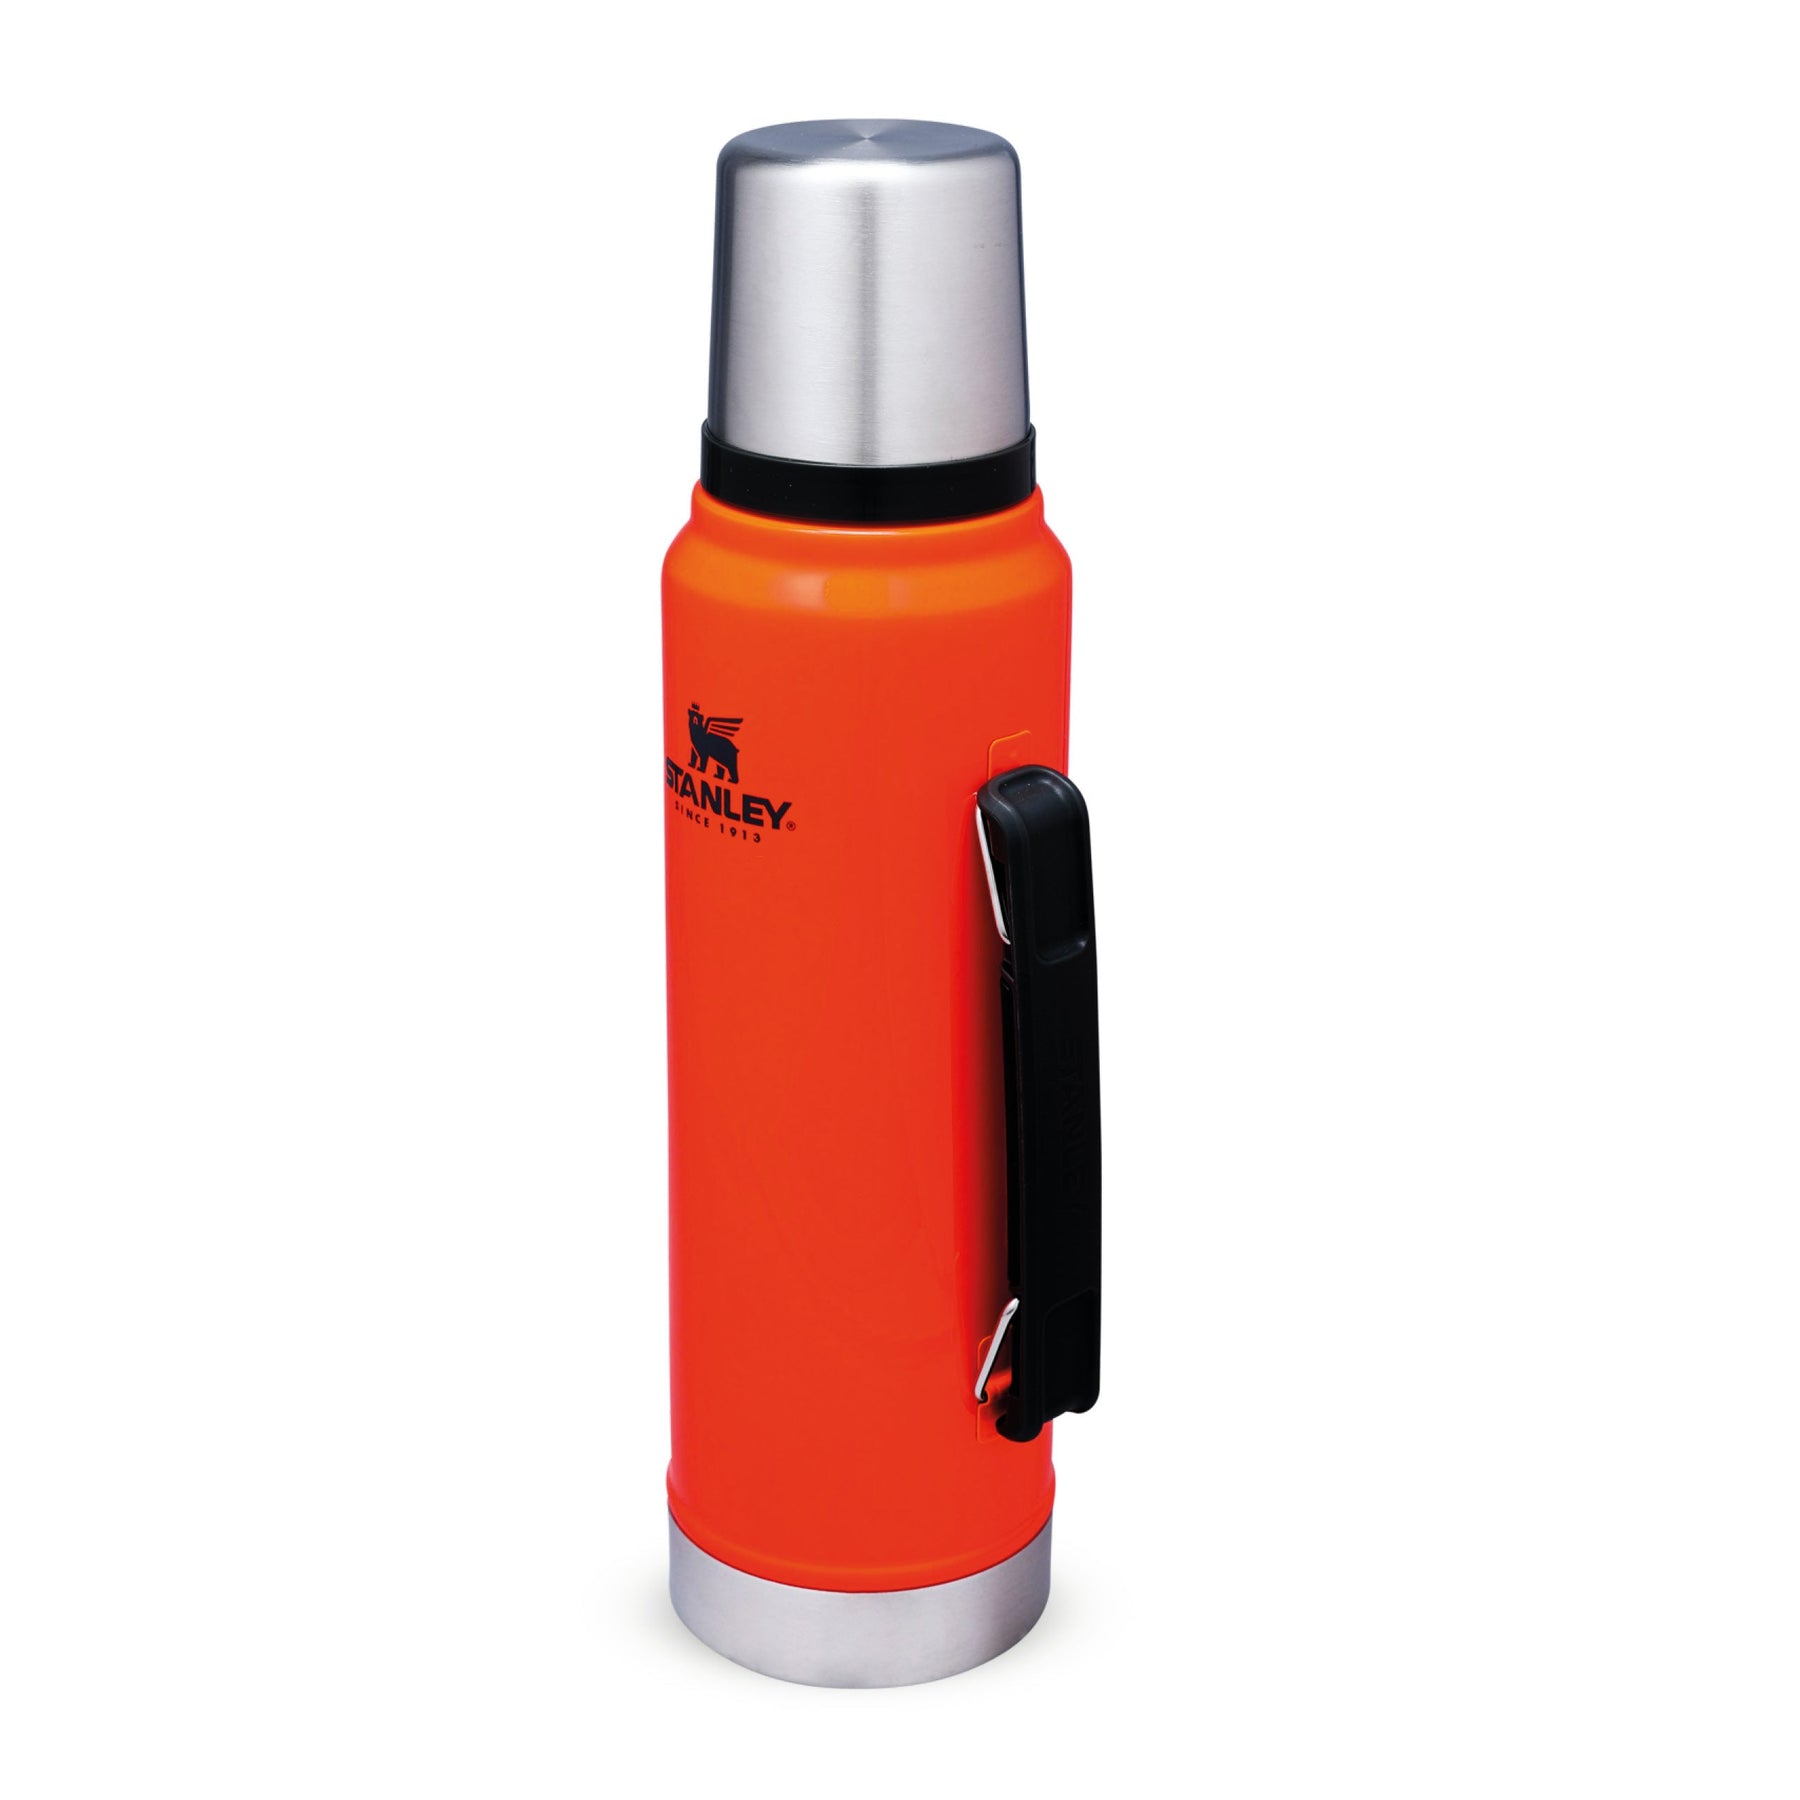 Stanley® Legendary Classic Thermos 1,9 l